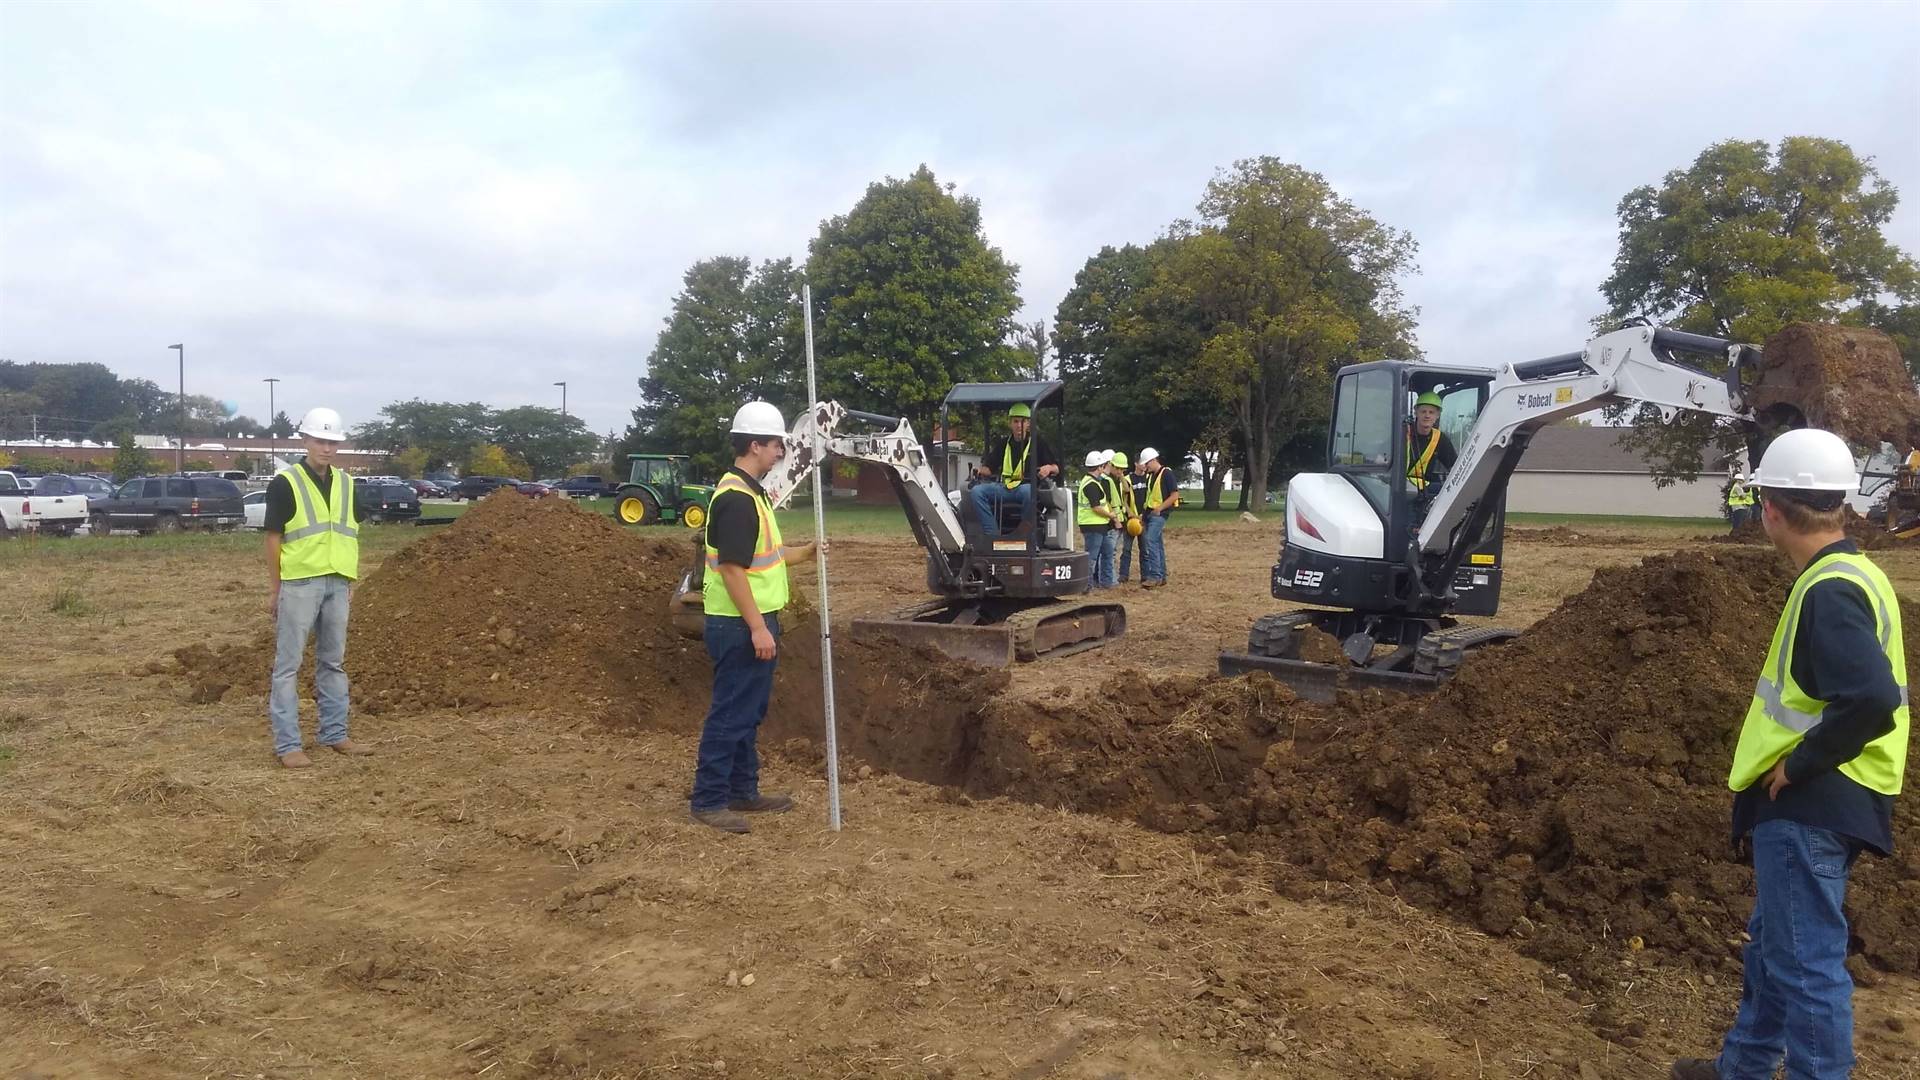 Students supervising other students digging with excavators